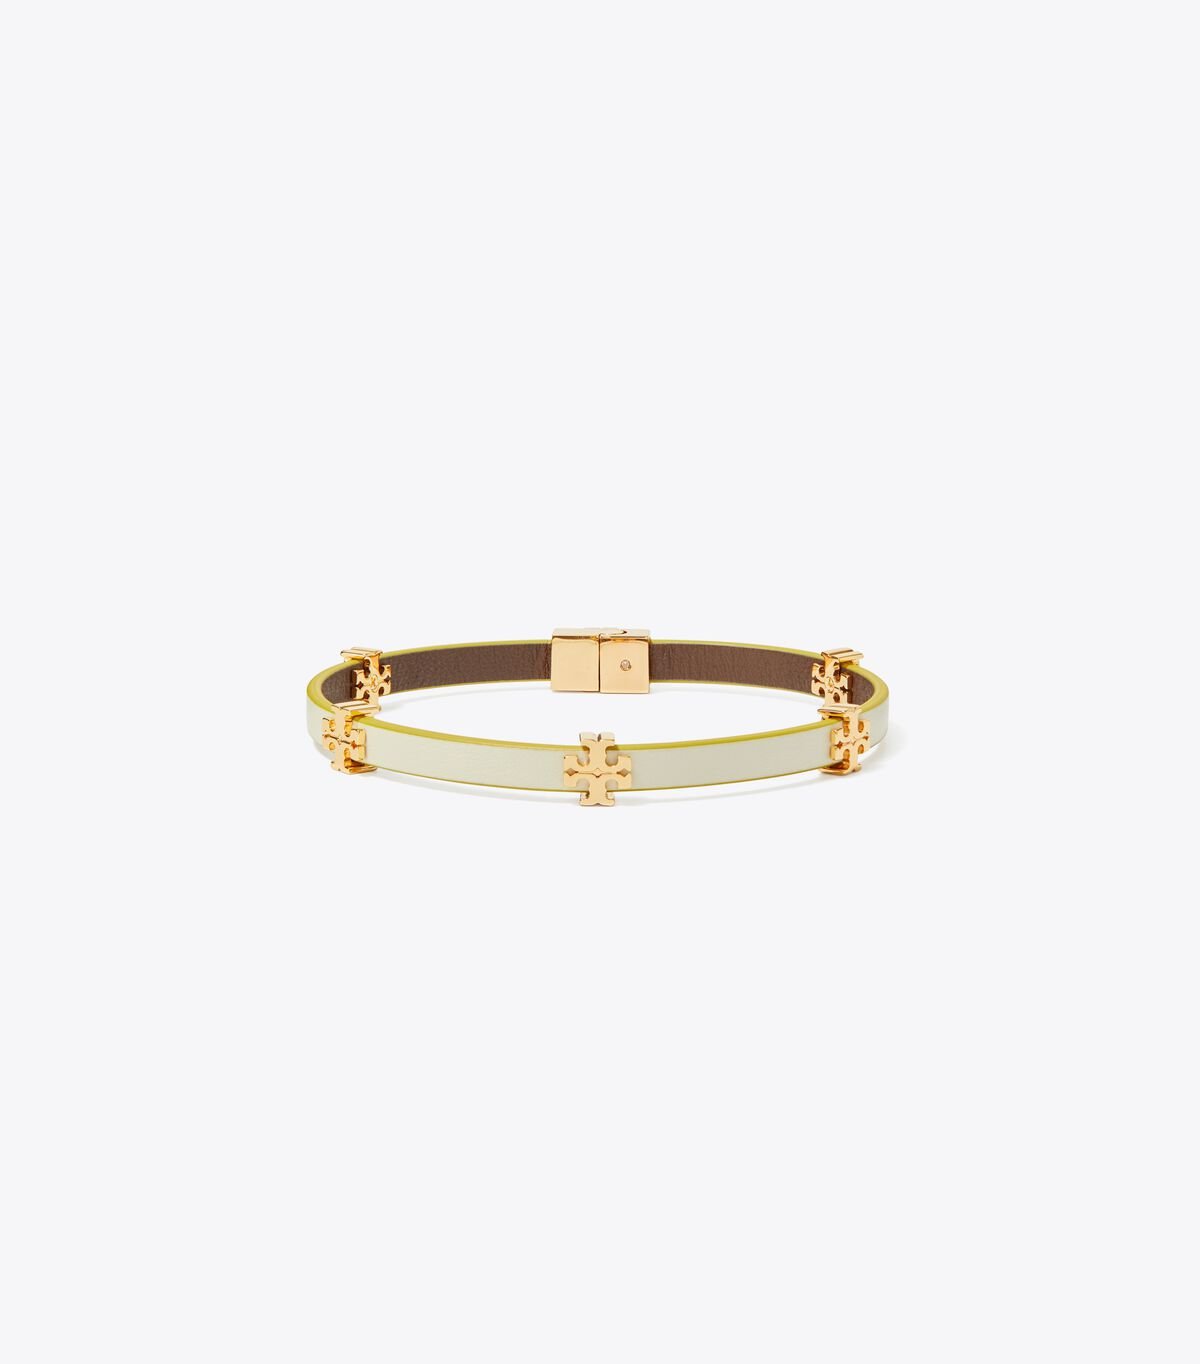 Gold / White Tory Burch Eleanor Leather Women's Bracelet | OUTLET-12380979